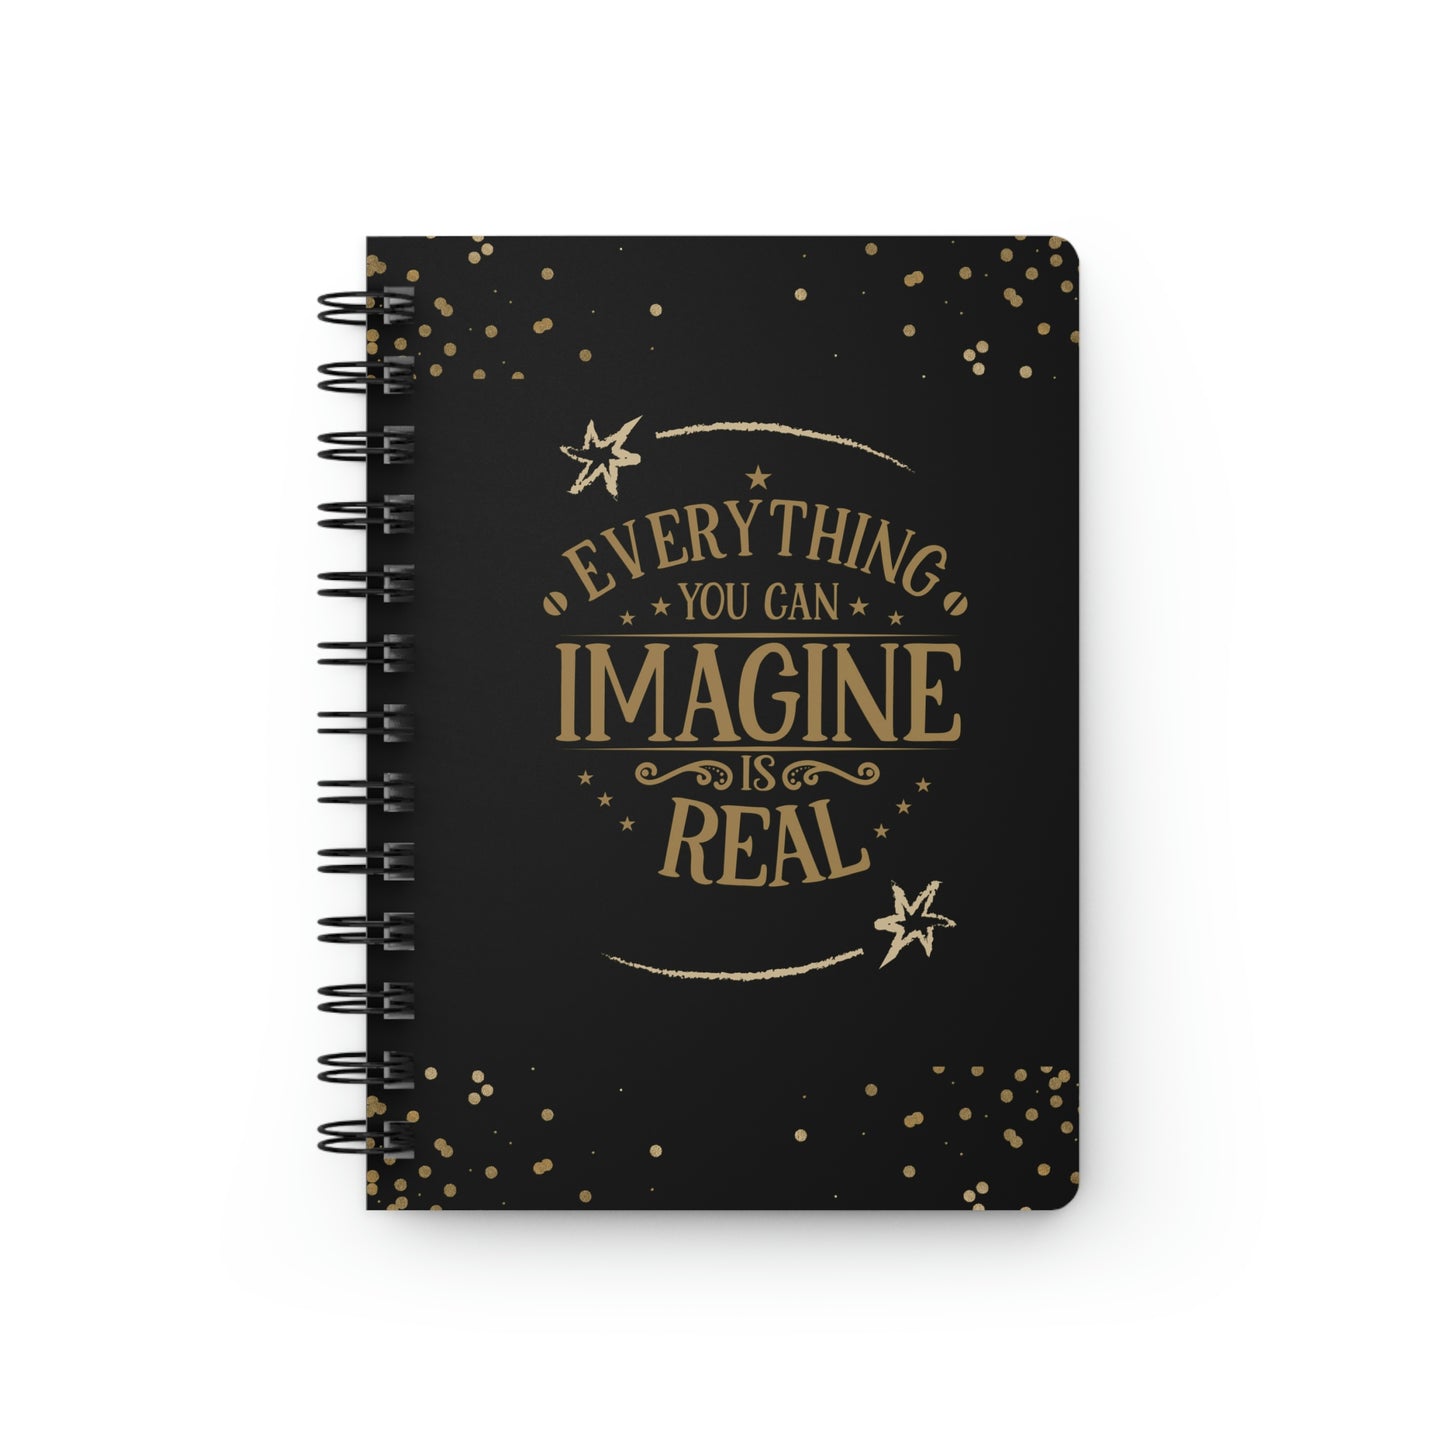 Everything you can Imagine is real, Journal, Notebook, Inspirational journal